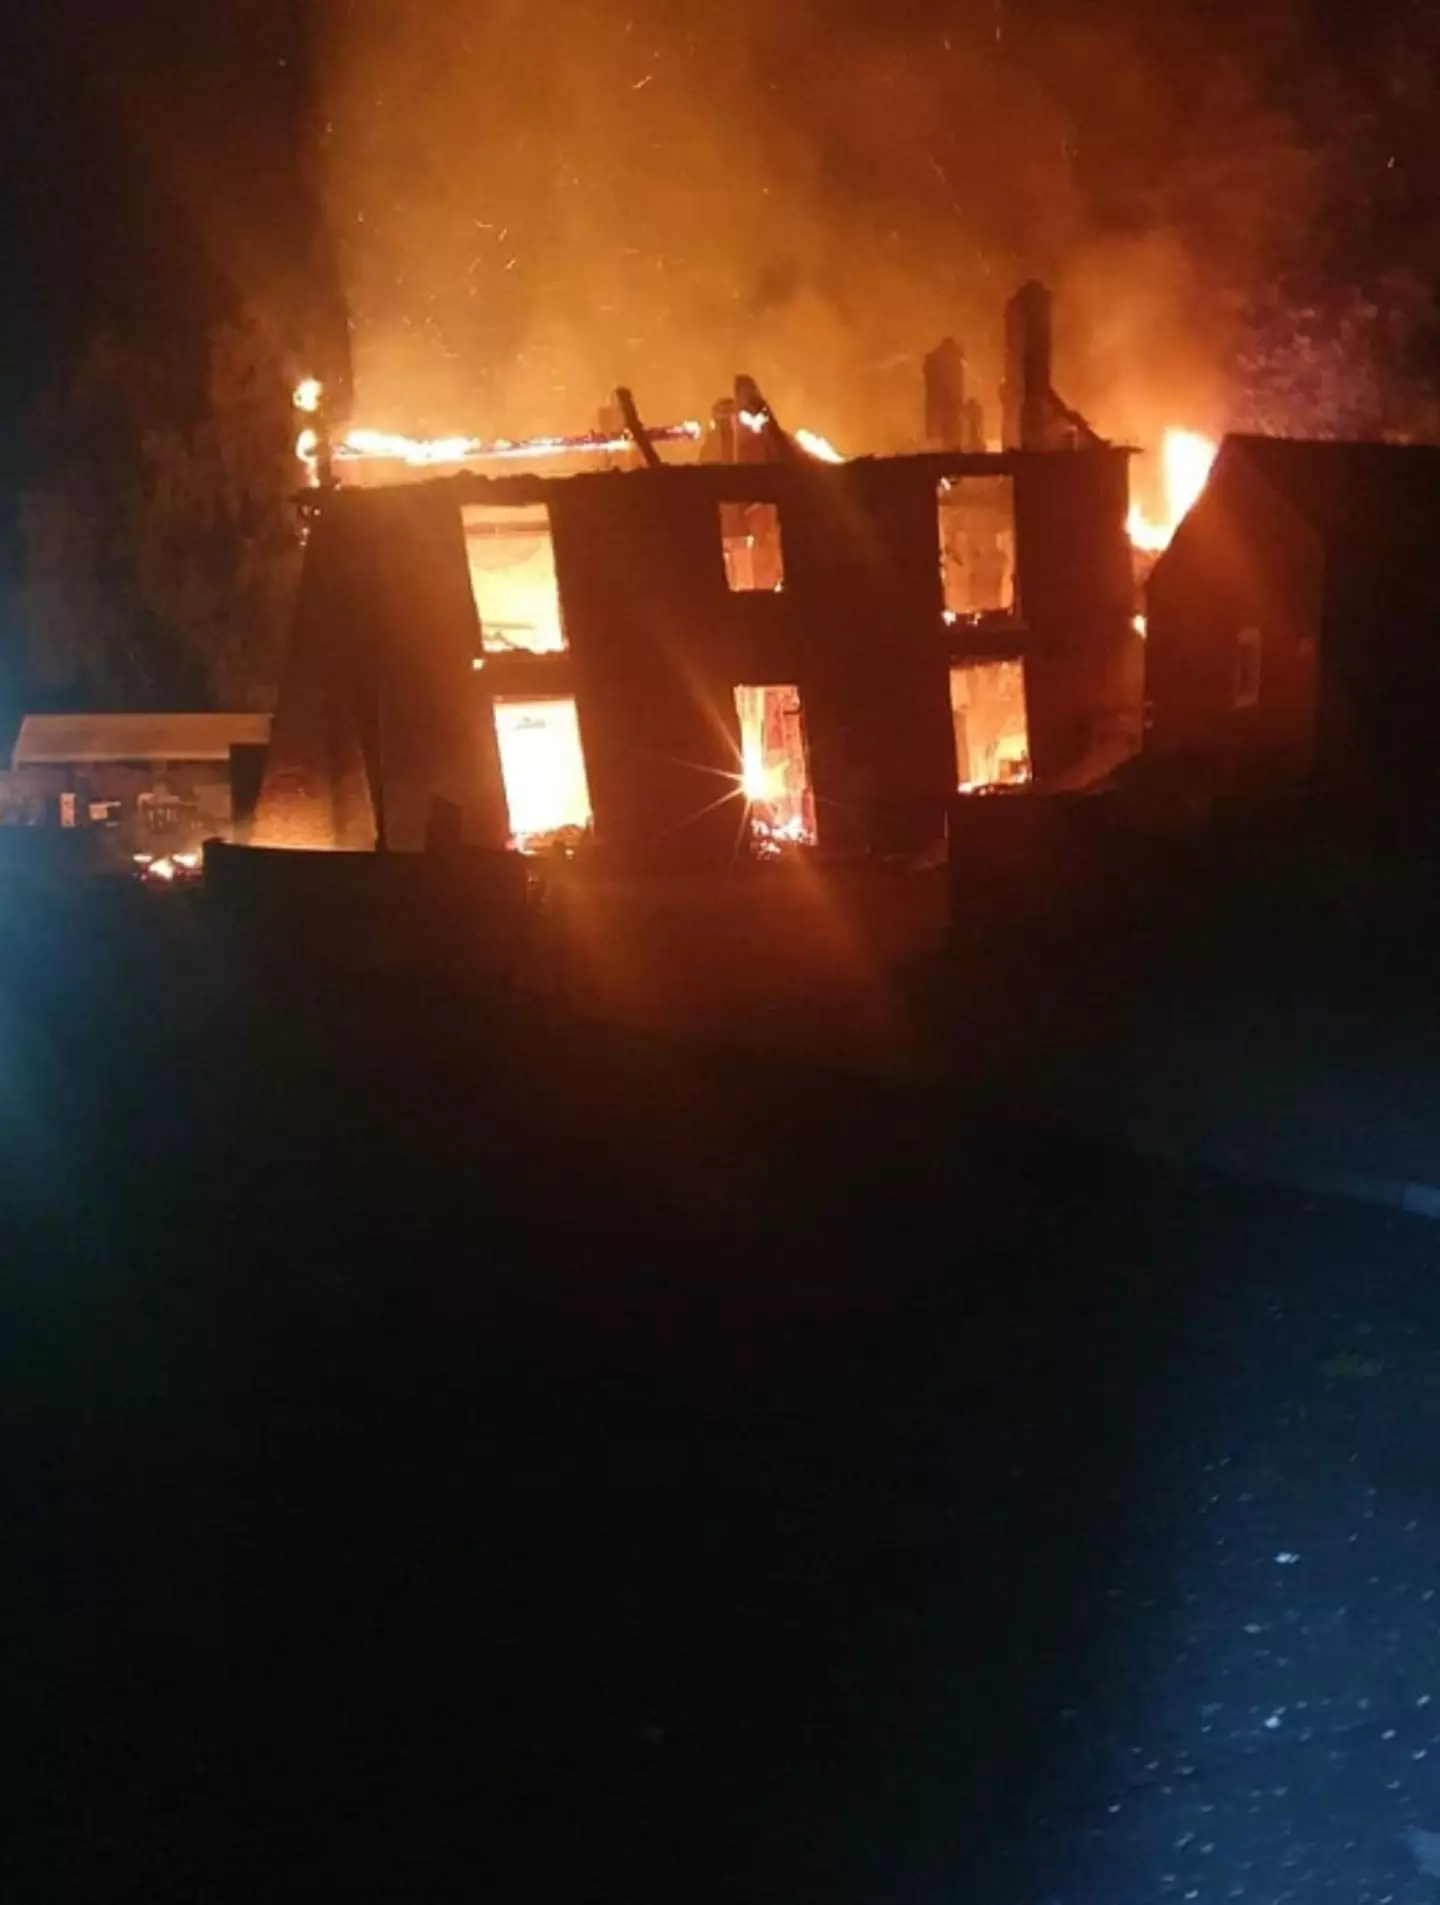 Footage of The Crooked House ablaze were shared on social media earlier this month.